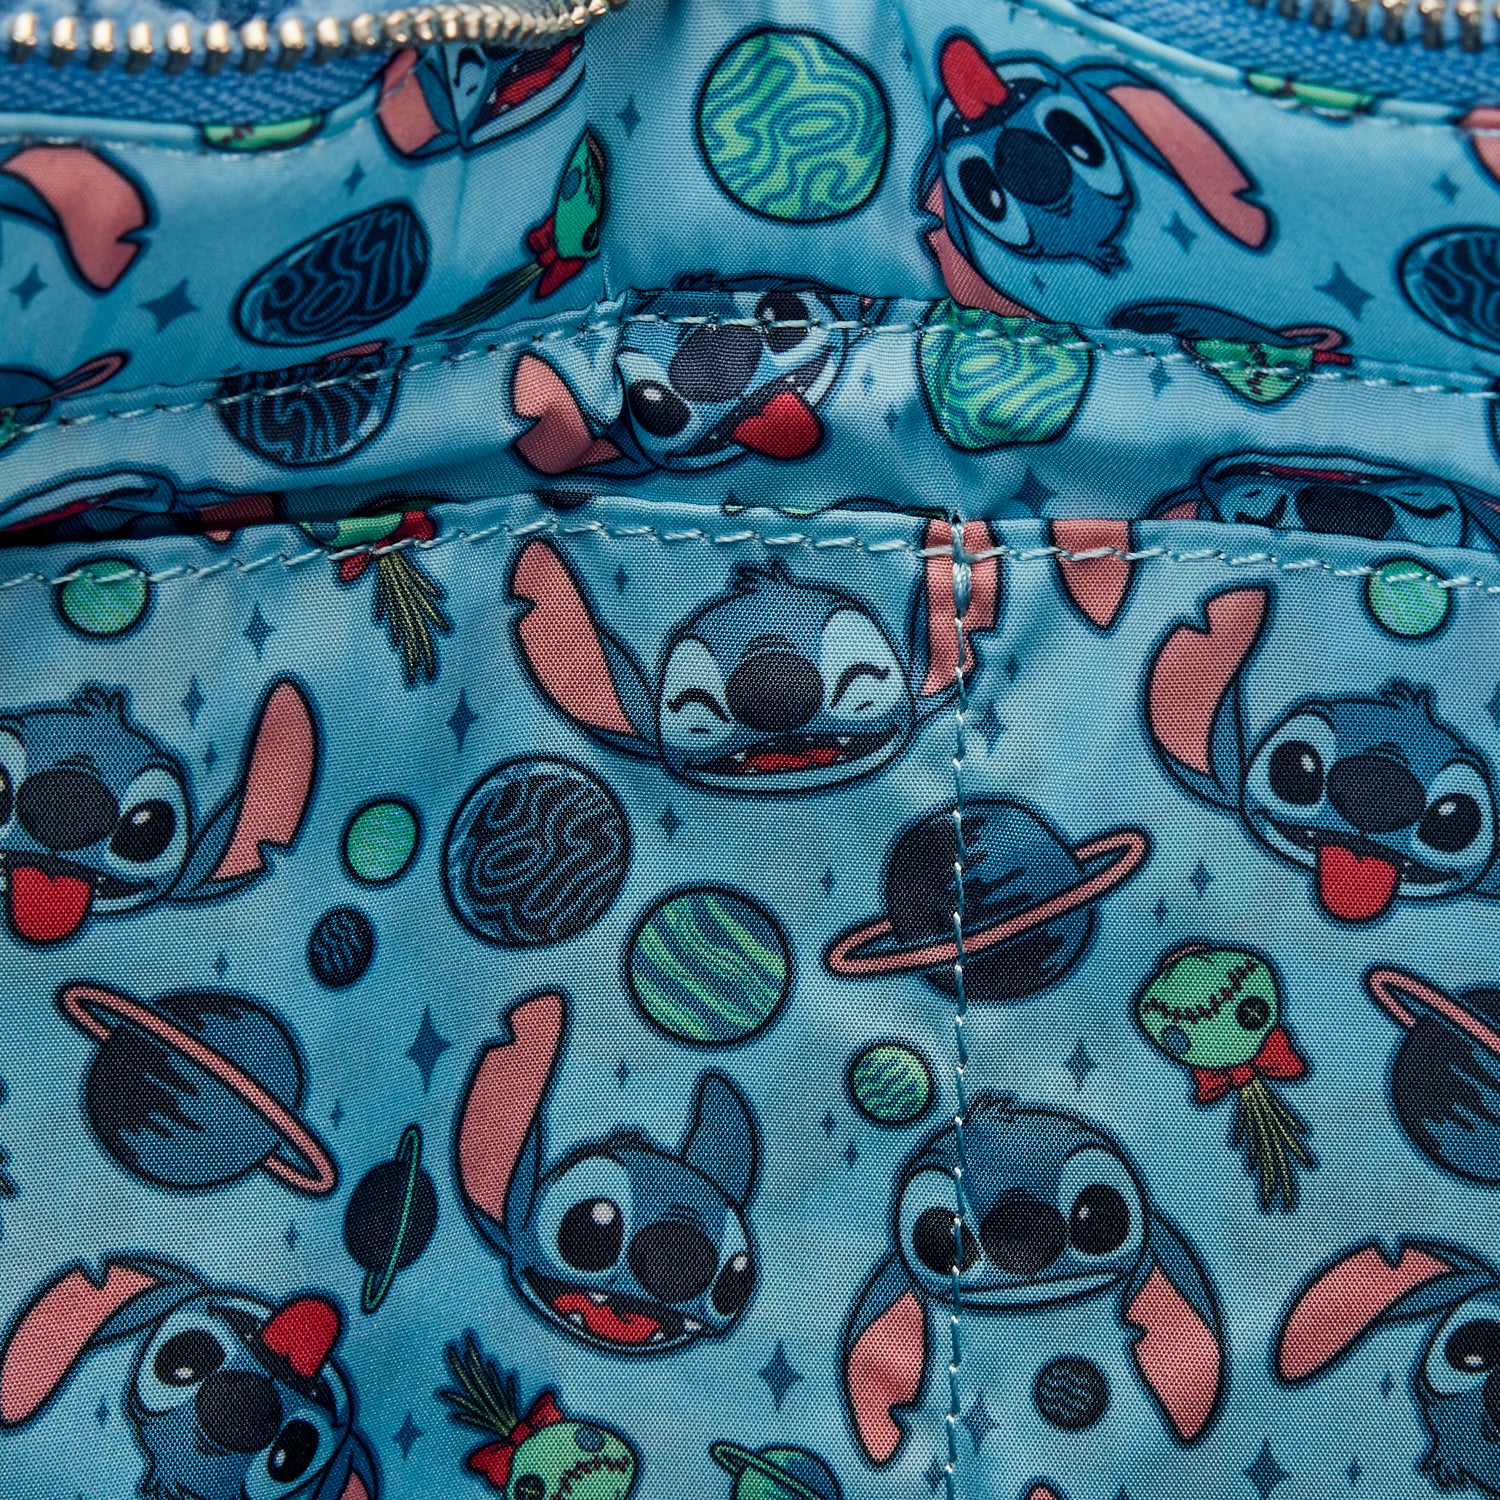 Loungefly x Disney Stitch Plush Tote Bag with coin pouch